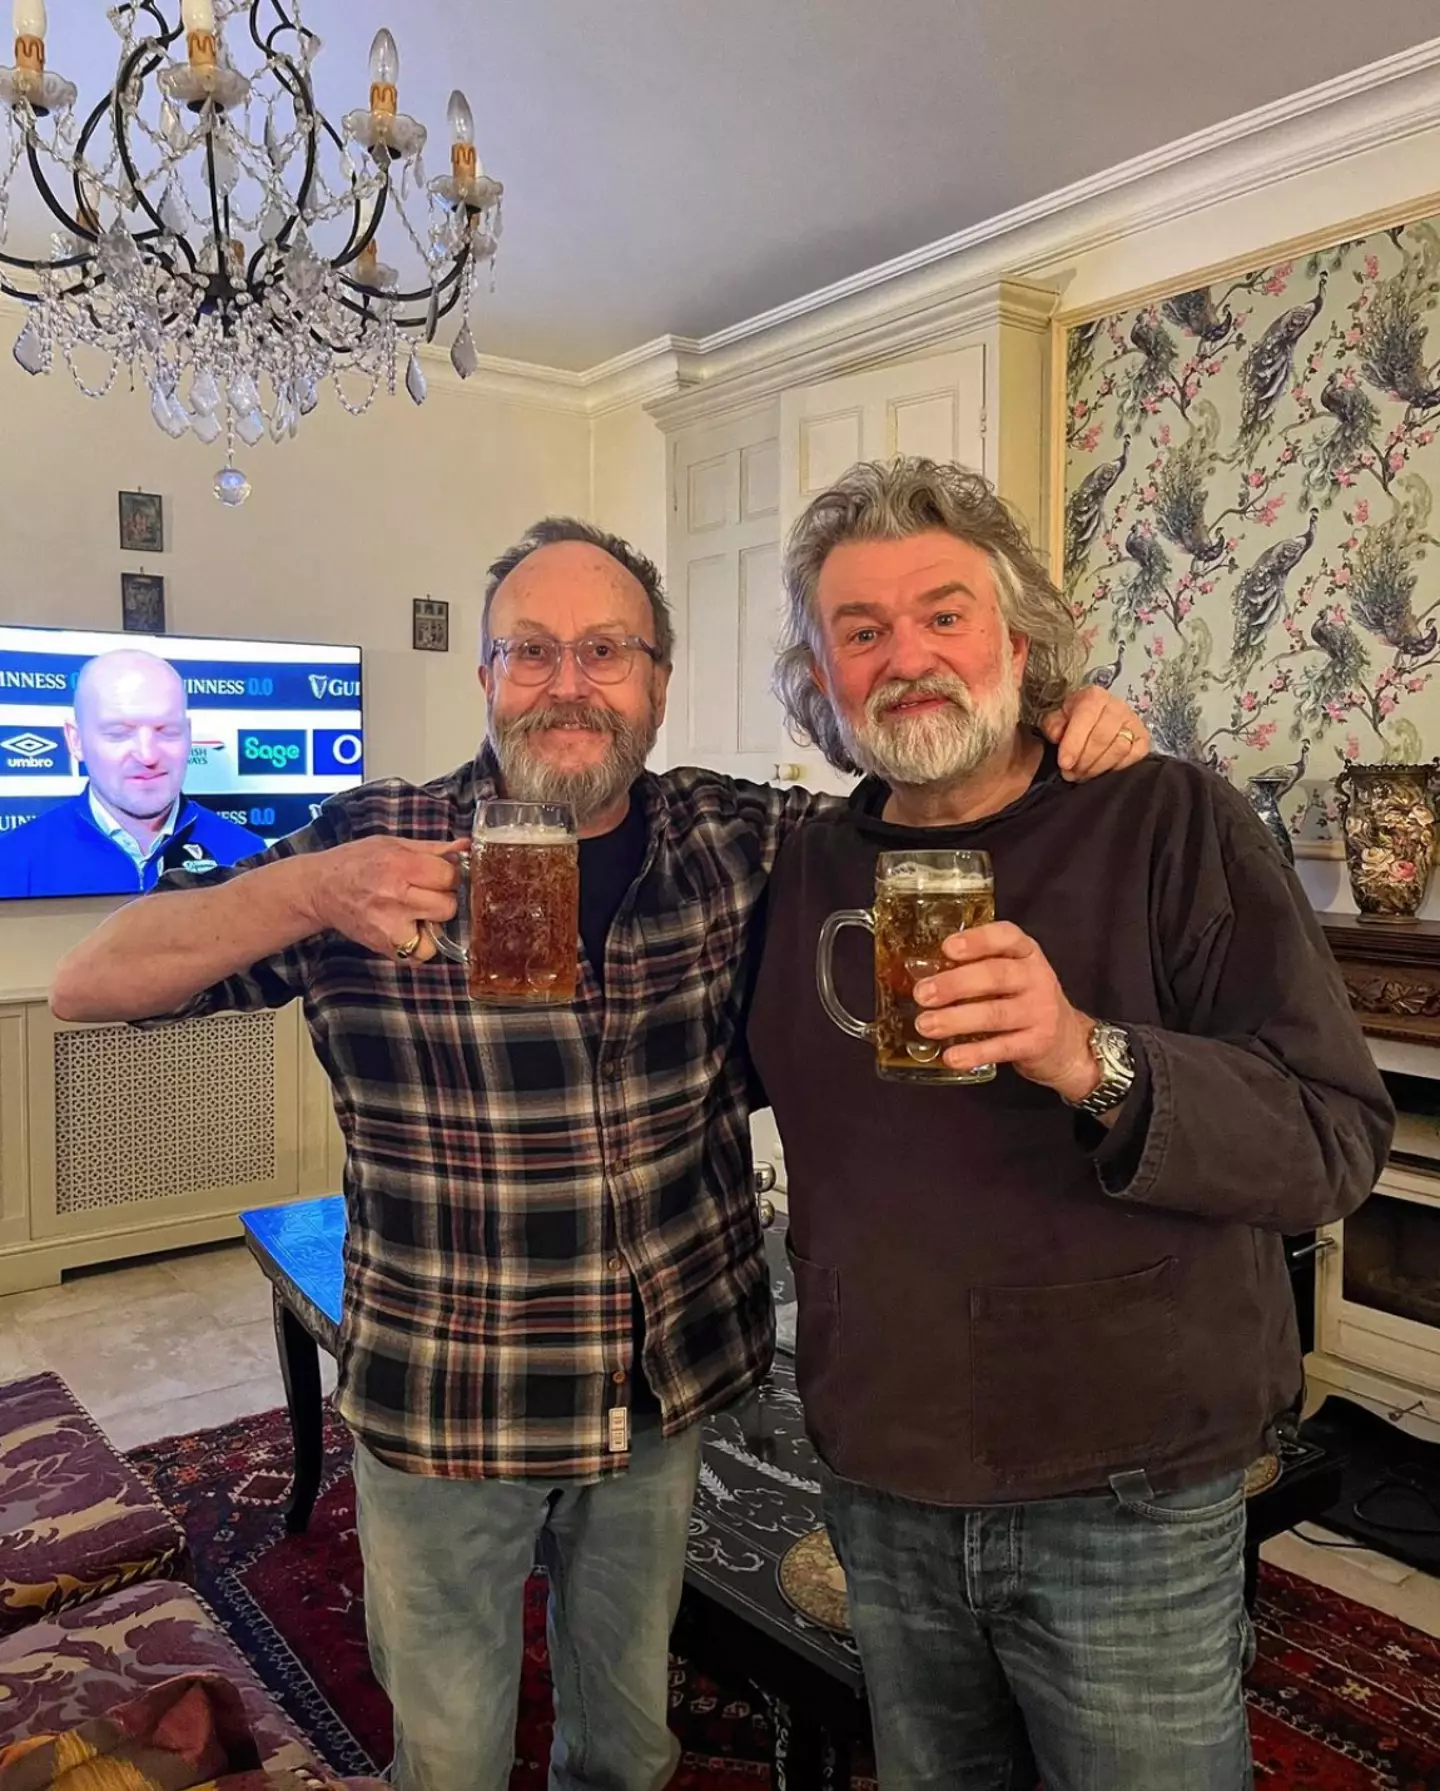 The next TV show from The Hairy Bikers has been confirmed.